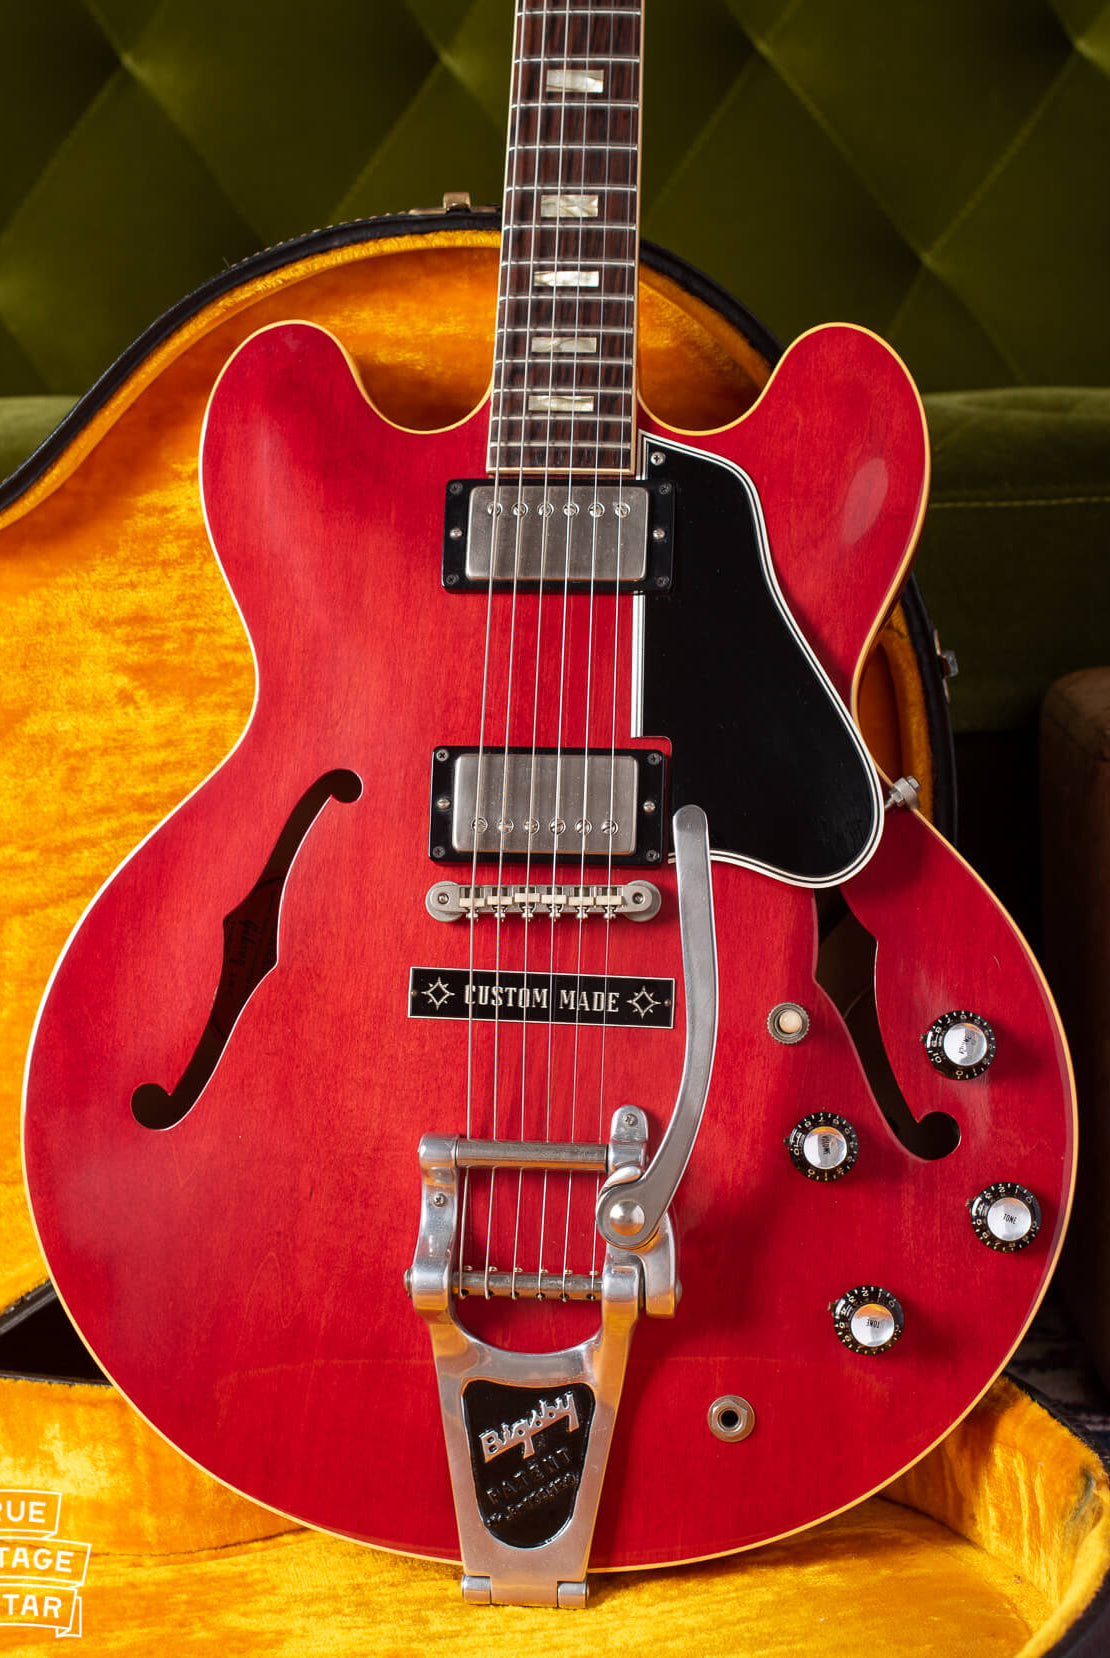 Gibson ES-335 1963 Cherry Red with Bigsby tailpiece and Custom Made plaque